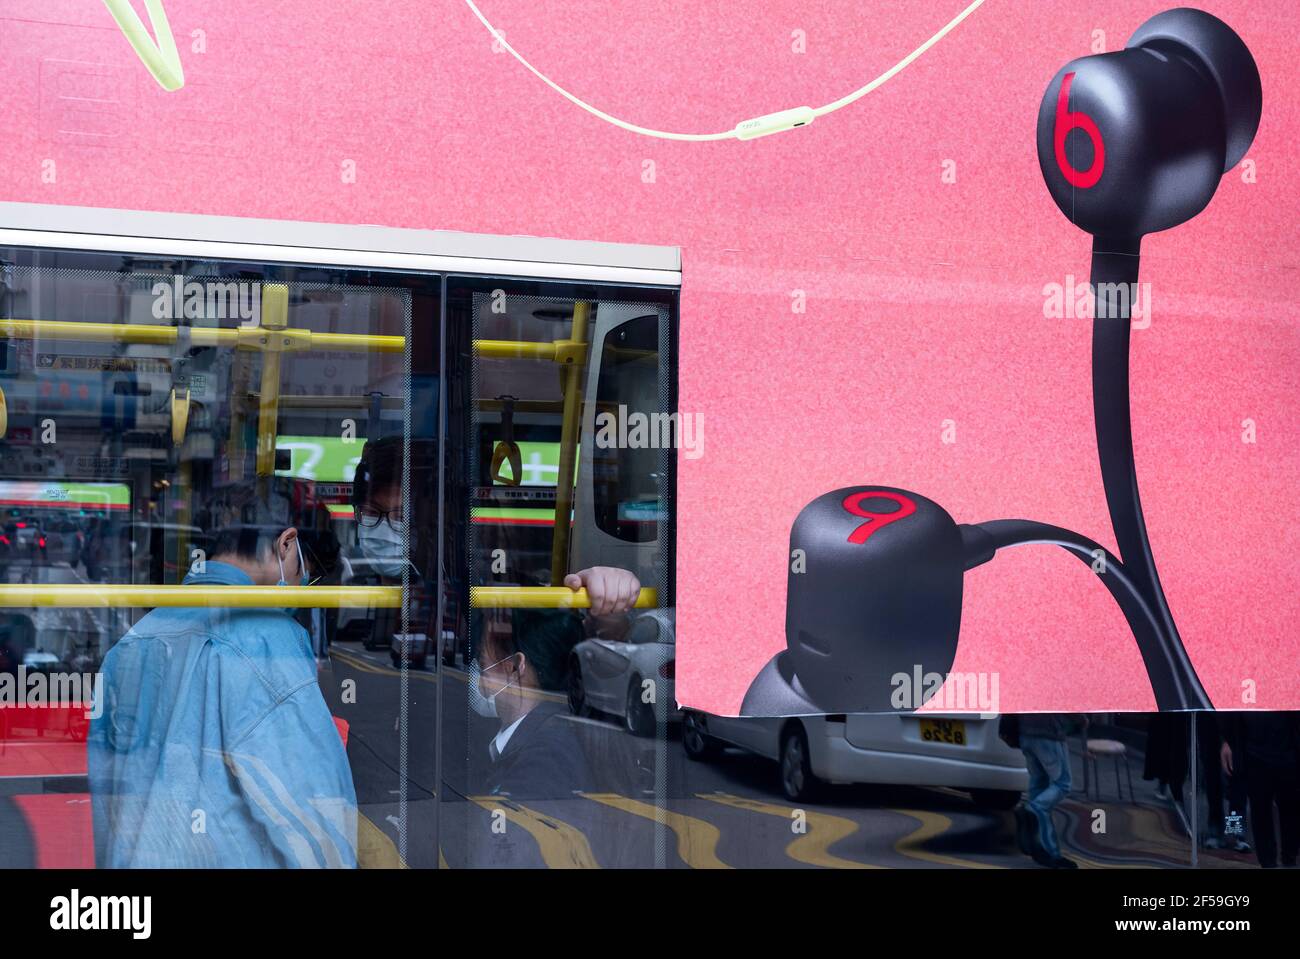 Hong Kong, China. 25th Mar, 2021. A bus displays a commercial ad of the American consumer audio products manufacturer brand Beats Electronics LLC, also known as Beats by Dr. Dre or simply Beats by Dre, in Hong Kong. (Photo by Budrul Chukrut/SOPA Images/Sipa USA) Credit: Sipa USA/Alamy Live News Stock Photo